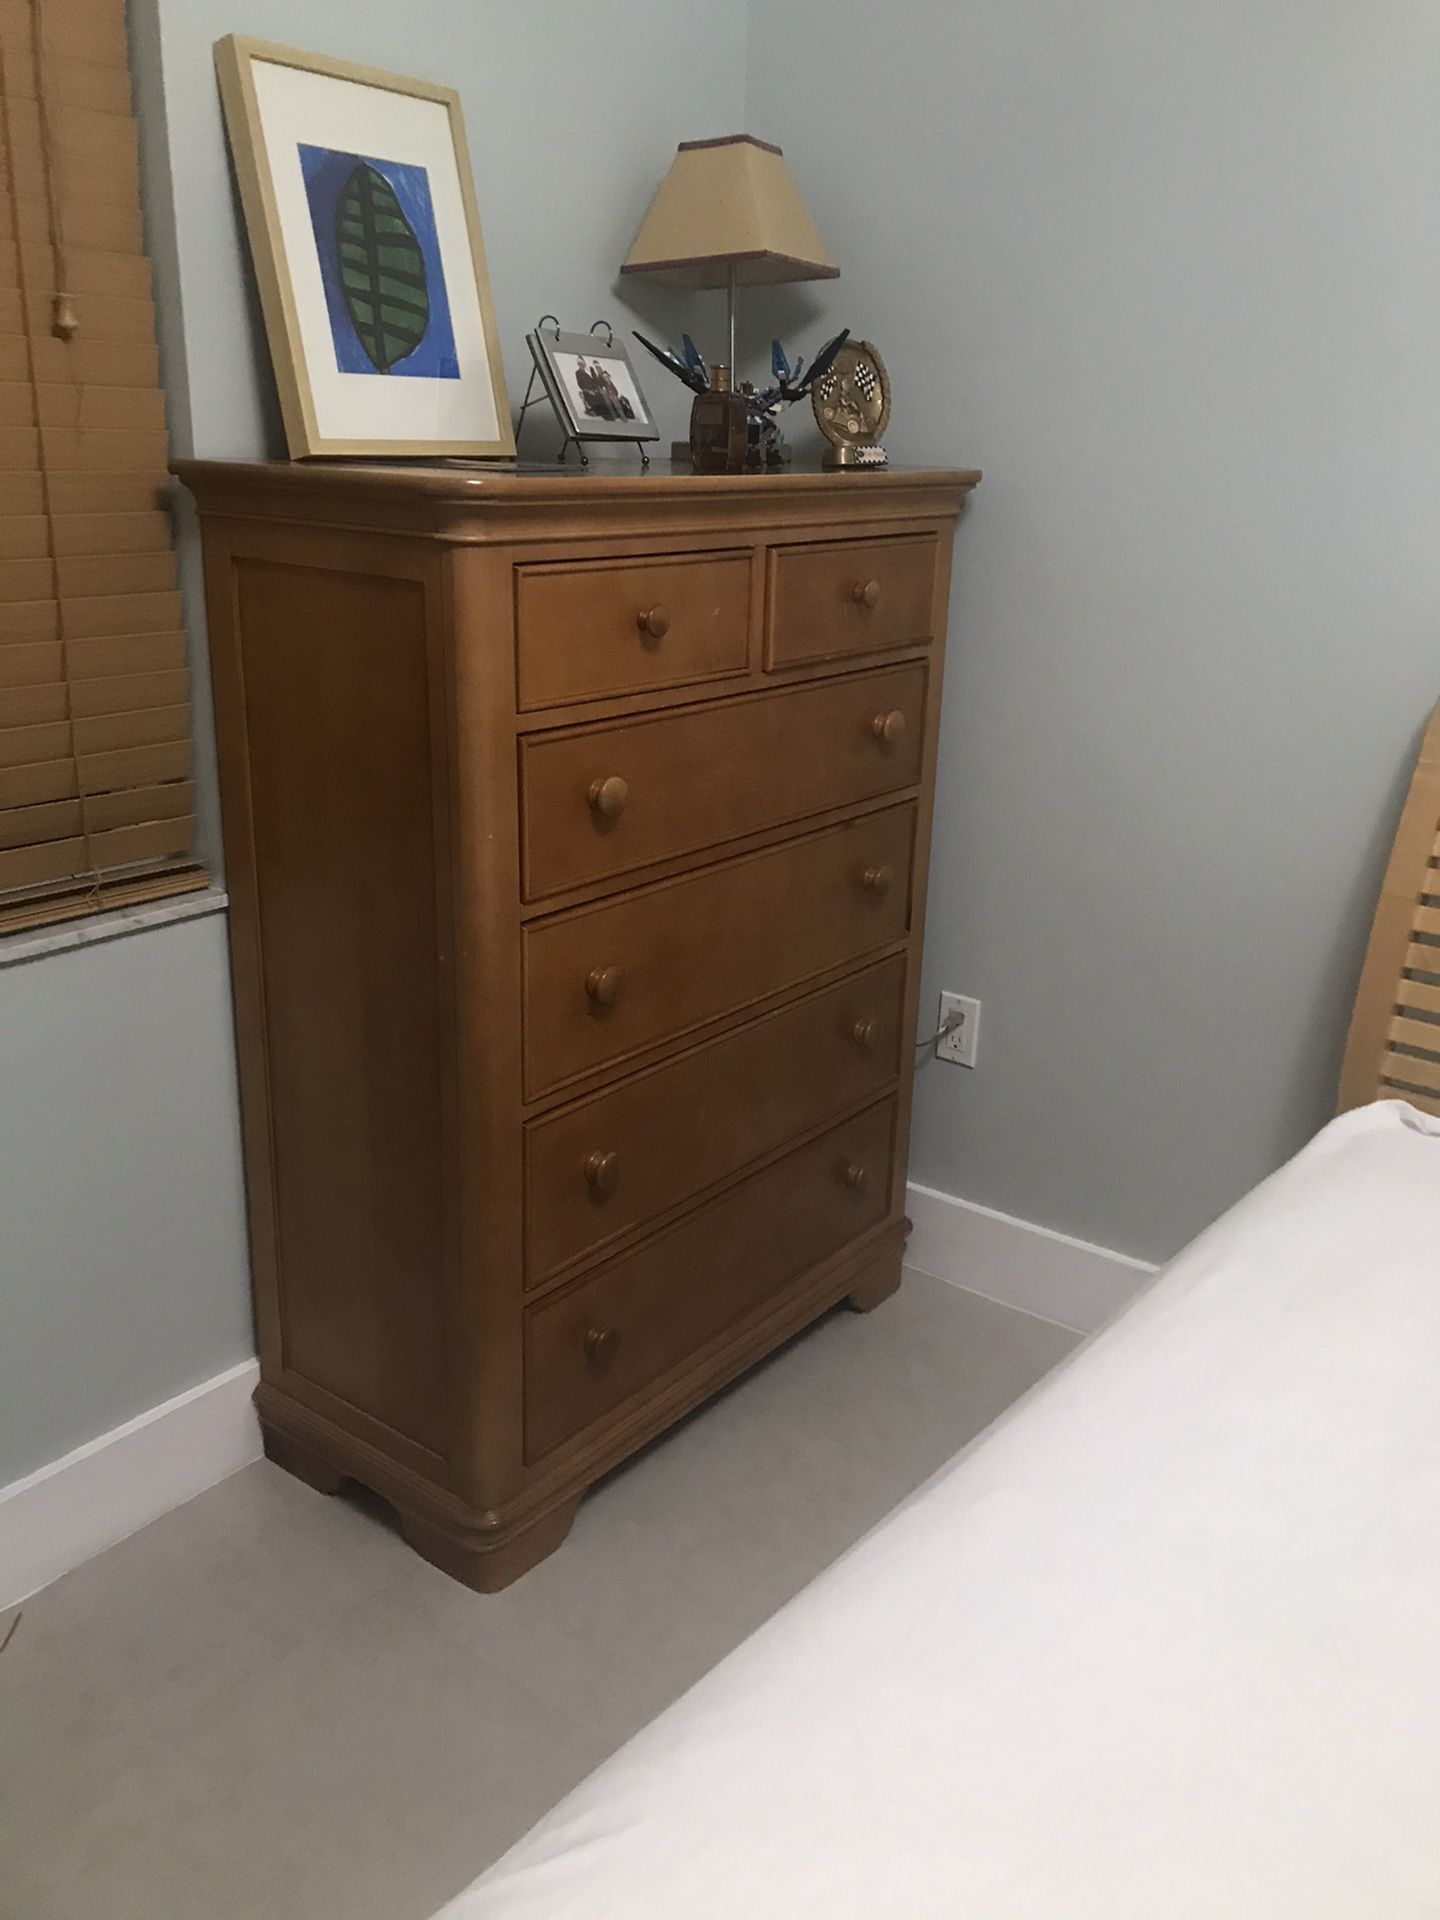 2 twin beds and dresser